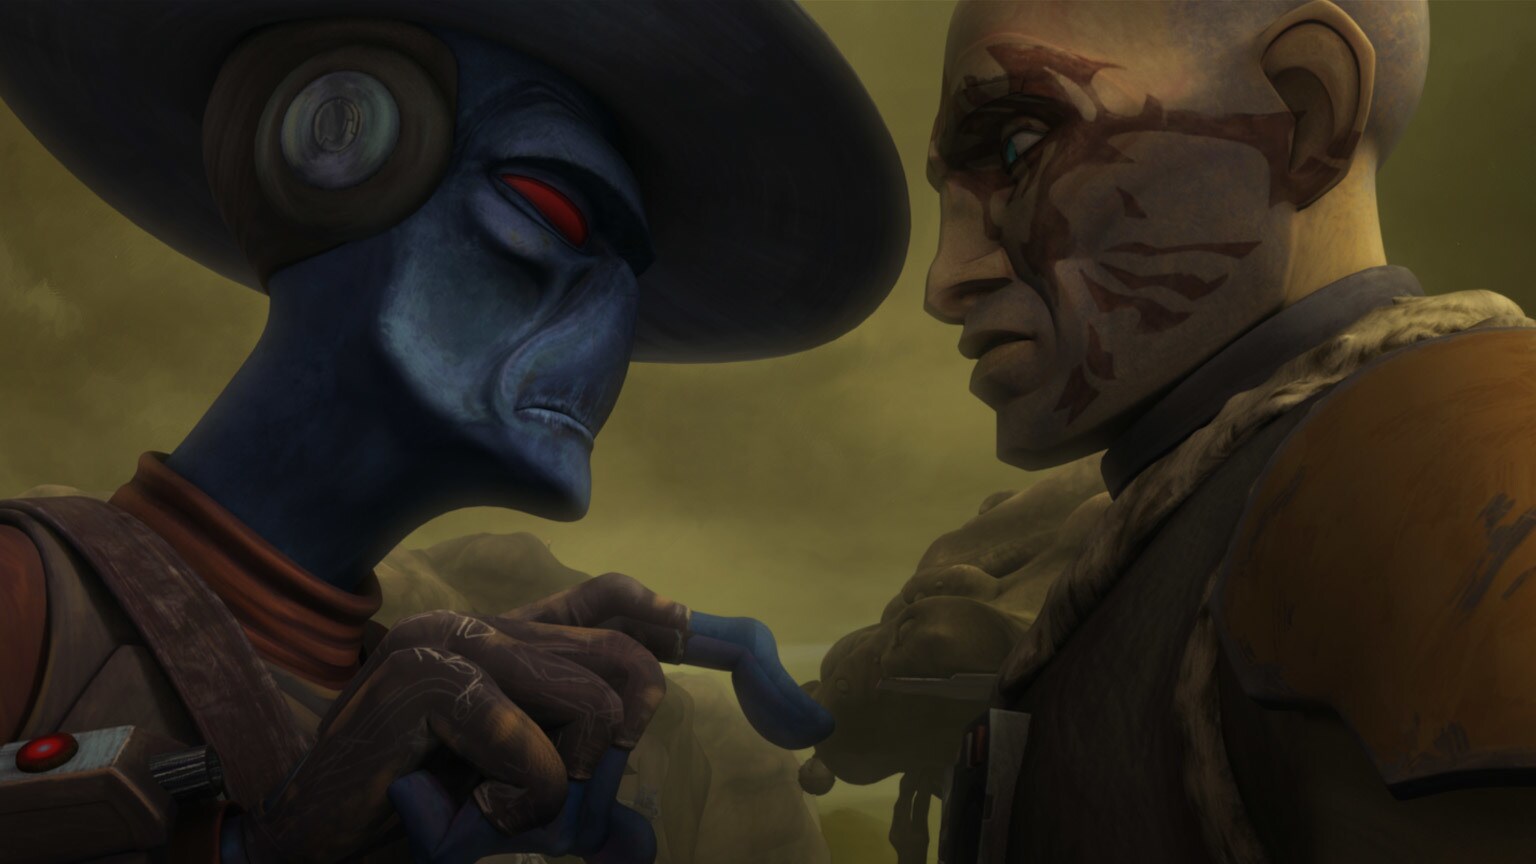 The Clone Wars Rewatch: Keep Your "Friends and Enemies" Close